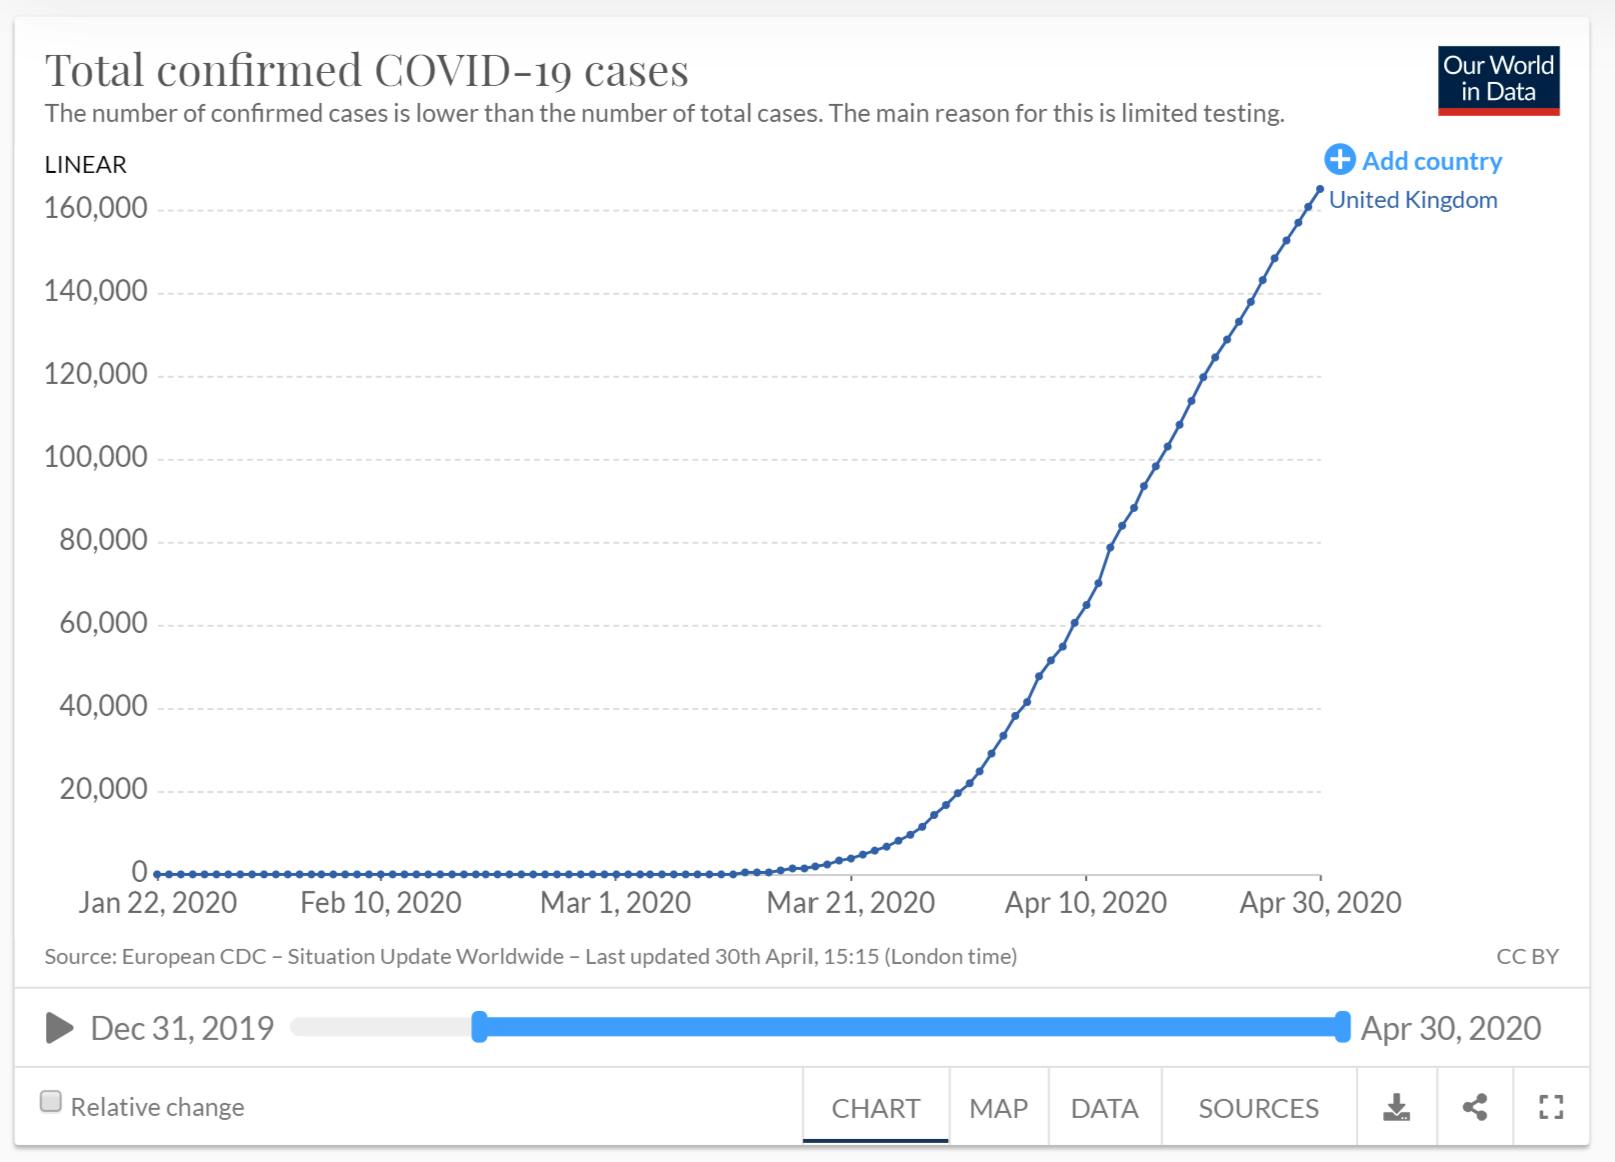 Total confirmed COVID-19 cases in the UK - Chart